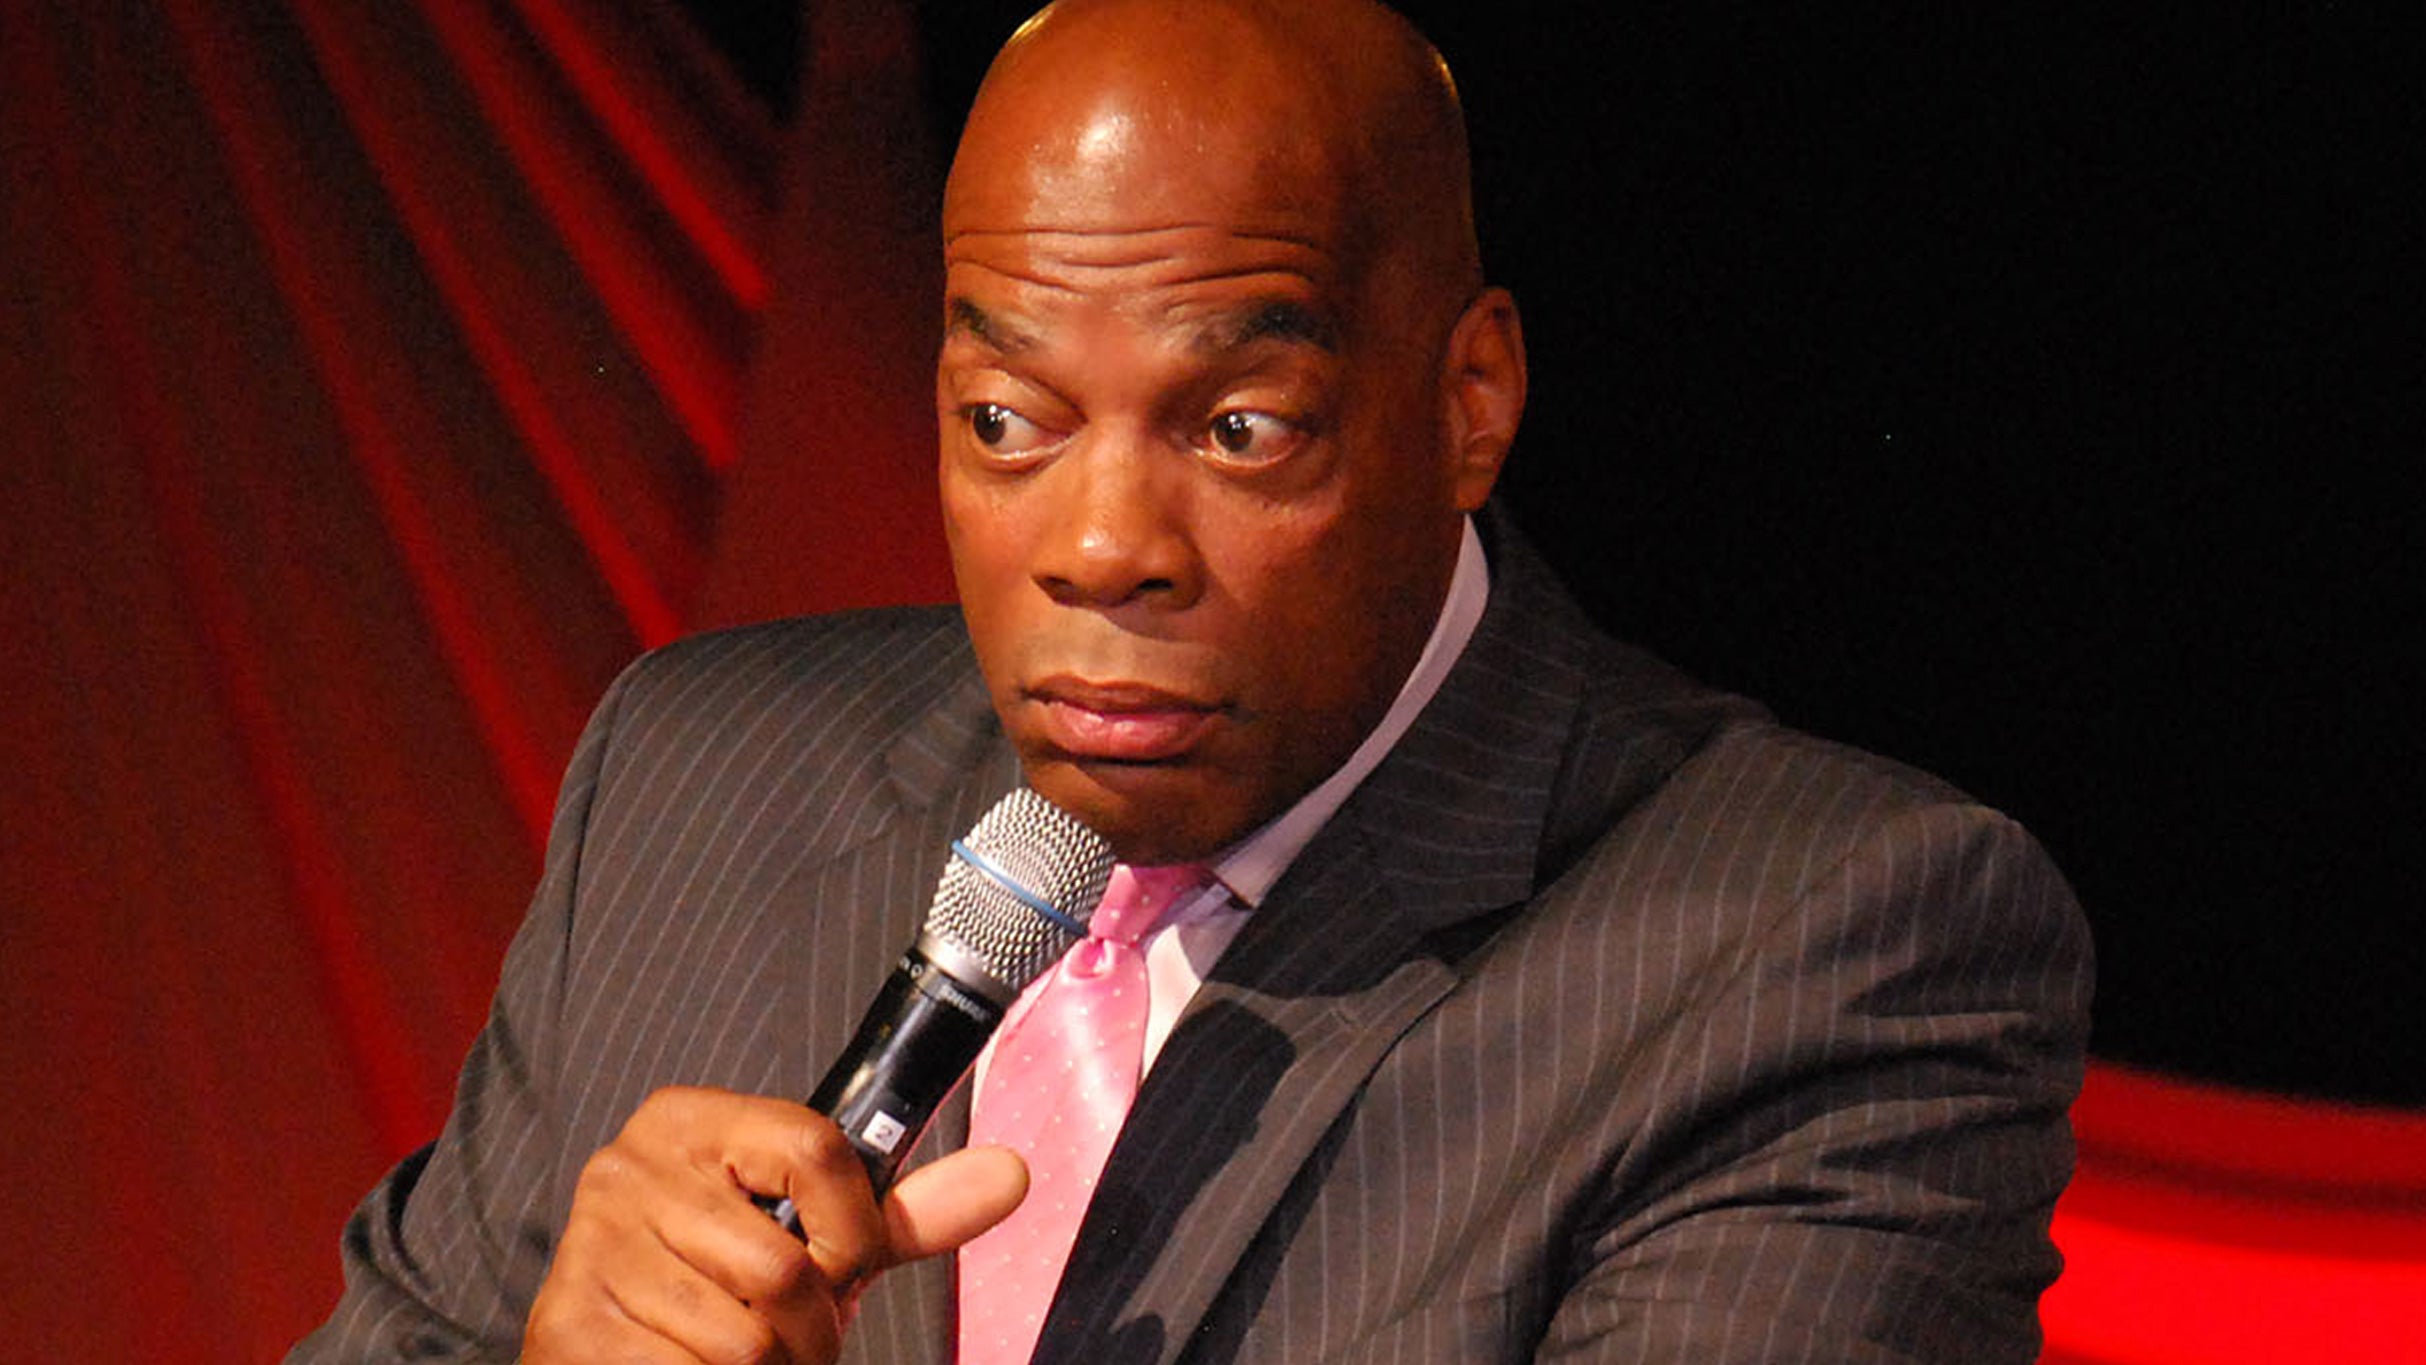 Alonzo Bodden at Blue Note Hawaii